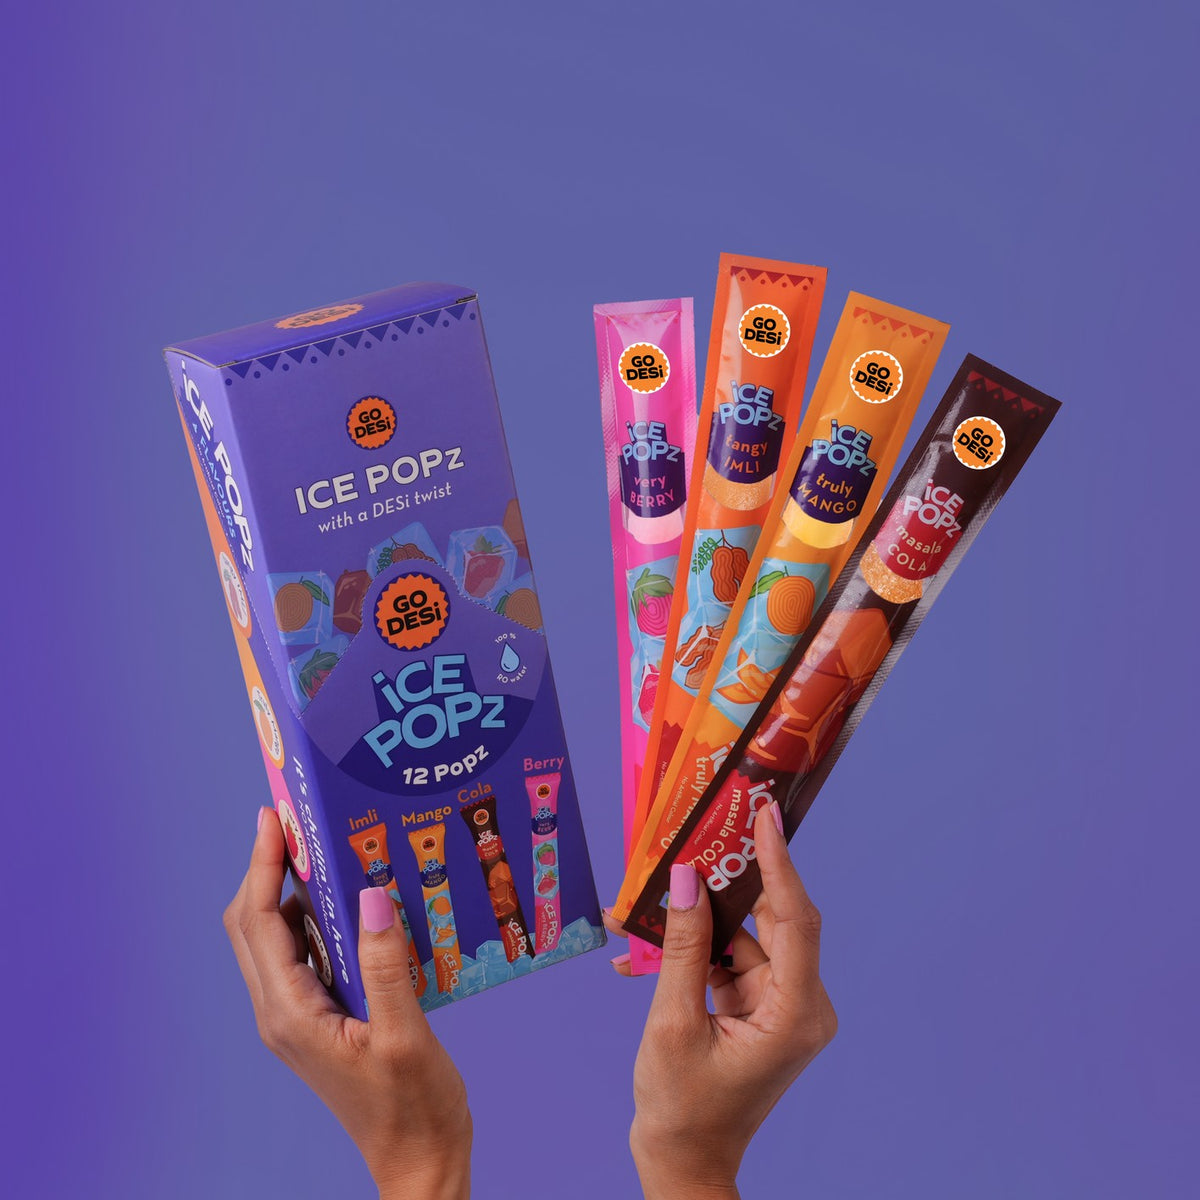 ICE Popz |12-Pack Assorted | 4 Flavours Fruit Ice Popsicles | Ice Pops (70ml Each) - Masala Cola, Truly Mango, Very Berry, Tangy Imli